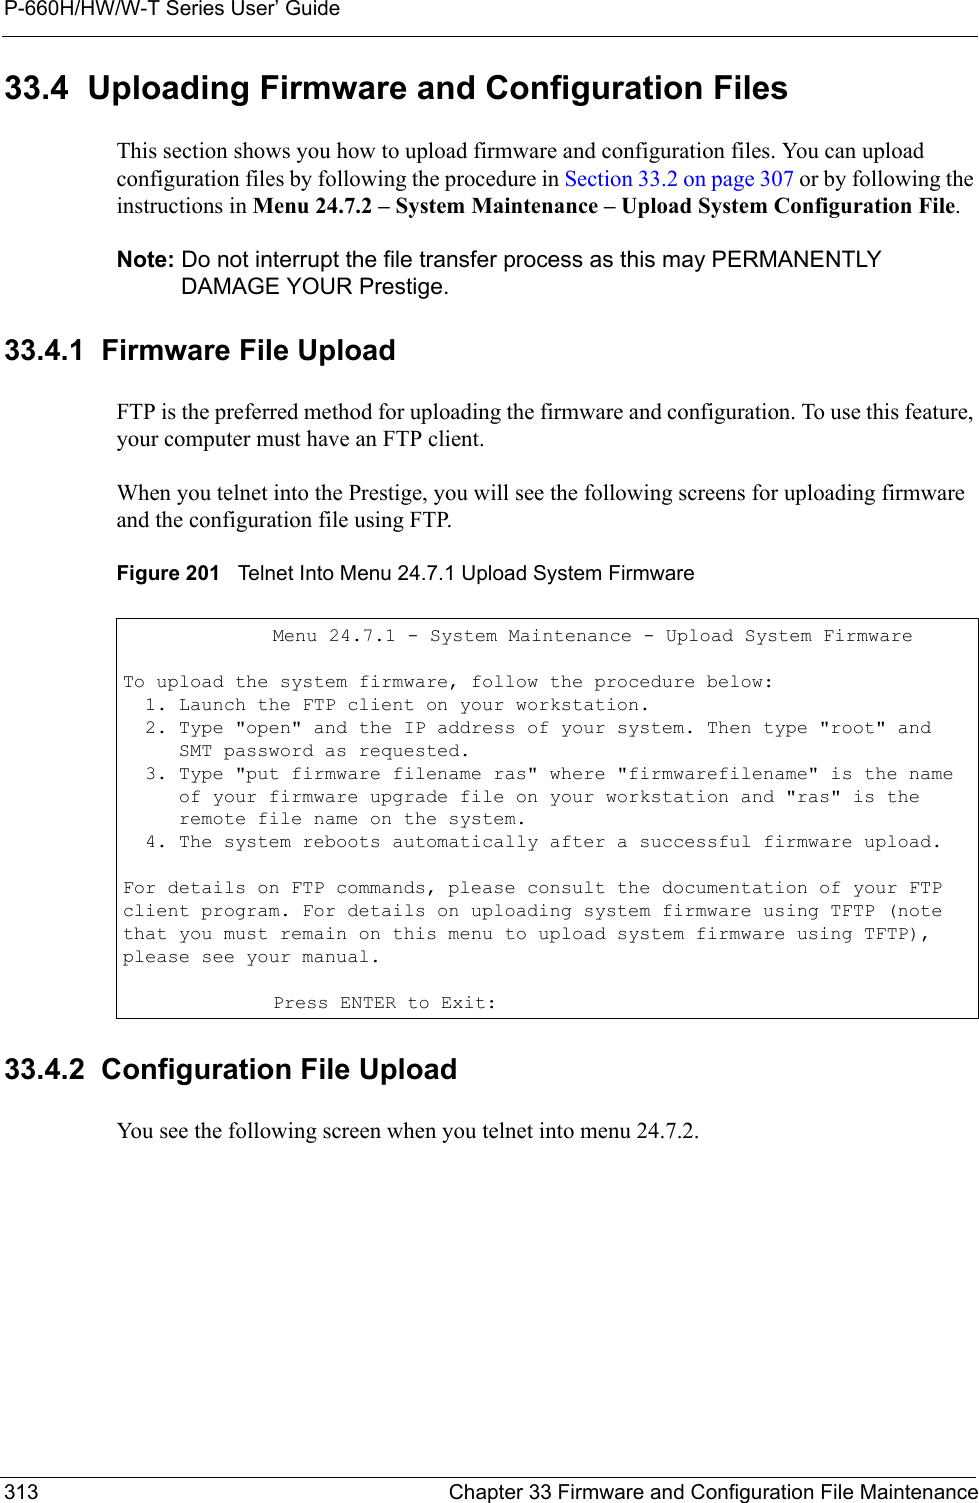 P-660H/HW/W-T Series User’ Guide313 Chapter 33 Firmware and Configuration File Maintenance33.4  Uploading Firmware and Configuration FilesThis section shows you how to upload firmware and configuration files. You can upload configuration files by following the procedure in Section 33.2 on page 307 or by following the instructions in Menu 24.7.2 – System Maintenance – Upload System Configuration File.Note: Do not interrupt the file transfer process as this may PERMANENTLY DAMAGE YOUR Prestige. 33.4.1  Firmware File UploadFTP is the preferred method for uploading the firmware and configuration. To use this feature, your computer must have an FTP client. When you telnet into the Prestige, you will see the following screens for uploading firmware and the configuration file using FTP.Figure 201   Telnet Into Menu 24.7.1 Upload System Firmware 33.4.2  Configuration File UploadYou see the following screen when you telnet into menu 24.7.2.Menu 24.7.1 - System Maintenance - Upload System FirmwareTo upload the system firmware, follow the procedure below:  1. Launch the FTP client on your workstation.  2. Type &quot;open&quot; and the IP address of your system. Then type &quot;root&quot; and     SMT password as requested.  3. Type &quot;put firmware filename ras&quot; where &quot;firmwarefilename&quot; is the name     of your firmware upgrade file on your workstation and &quot;ras&quot; is the     remote file name on the system.  4. The system reboots automatically after a successful firmware upload.For details on FTP commands, please consult the documentation of your FTPclient program. For details on uploading system firmware using TFTP (notethat you must remain on this menu to upload system firmware using TFTP),please see your manual.Press ENTER to Exit: